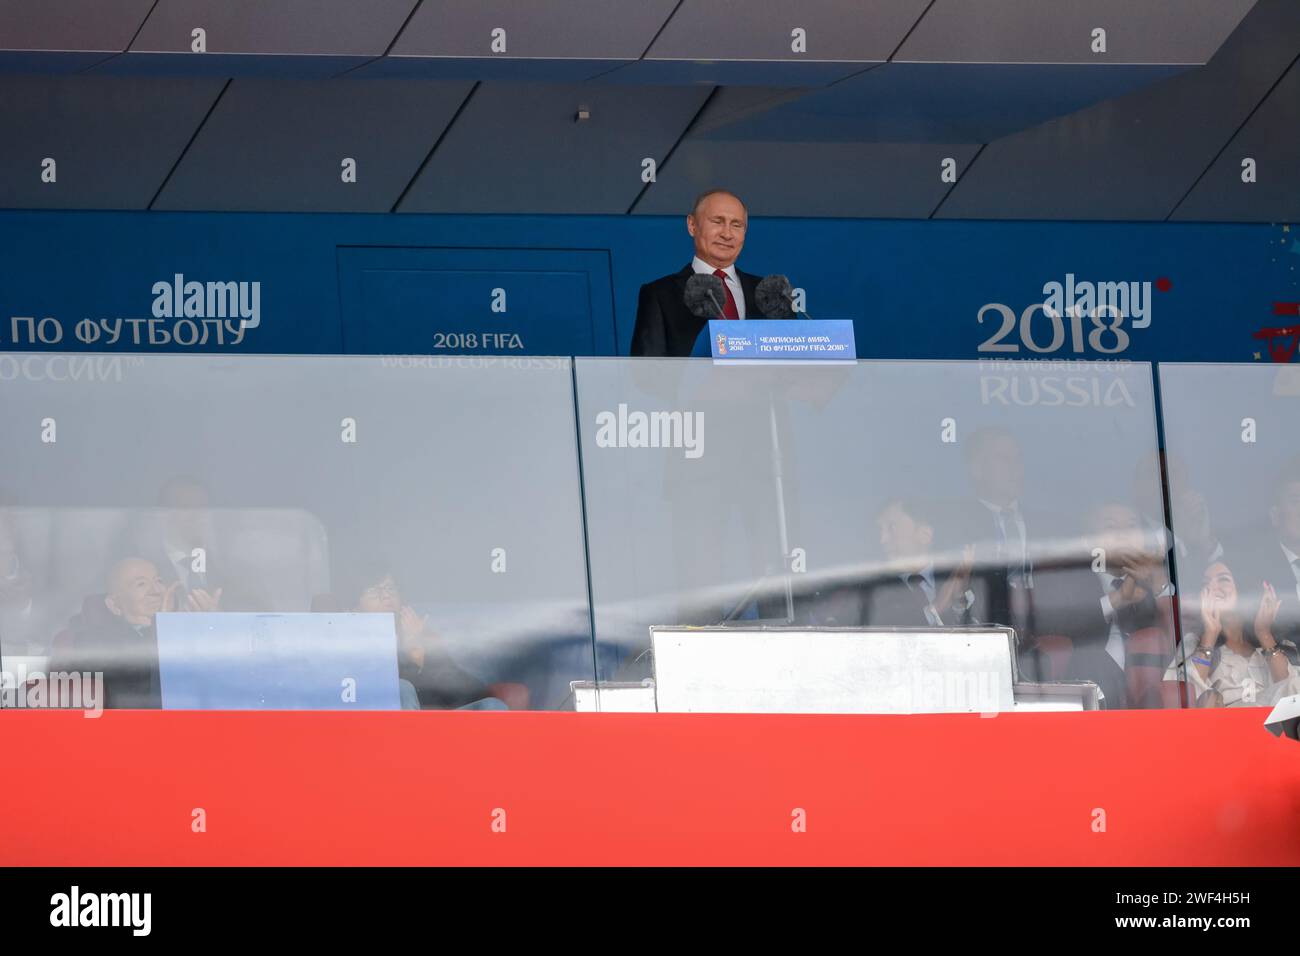 Moscow, Russia – June 14, 2018. Russian President Vladimir Putin delivering a speech at the opening ceremony of FIFA World Cup 2018 in Russia (5-0). Stock Photo